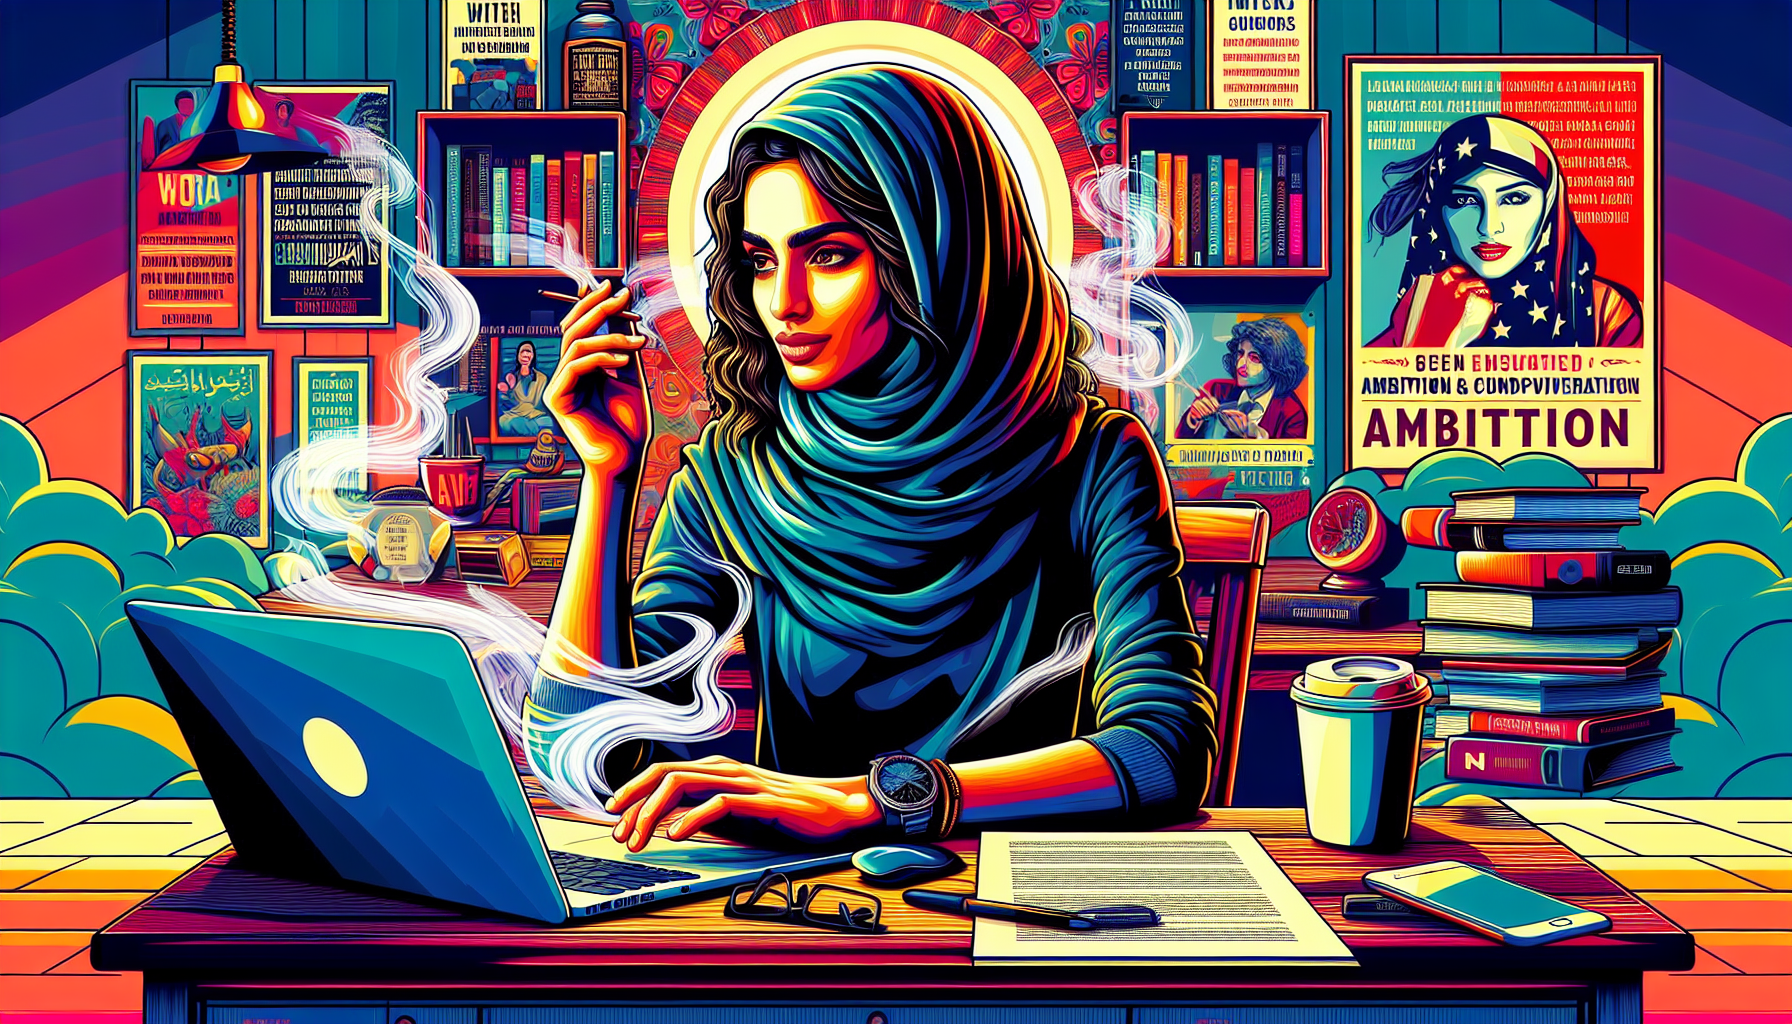 Create an image of a confident and focused person sitting at a cozy home office desk, typing on a laptop with a steaming cup of coffee nearby. The background includes a bookshelf filled with writing g